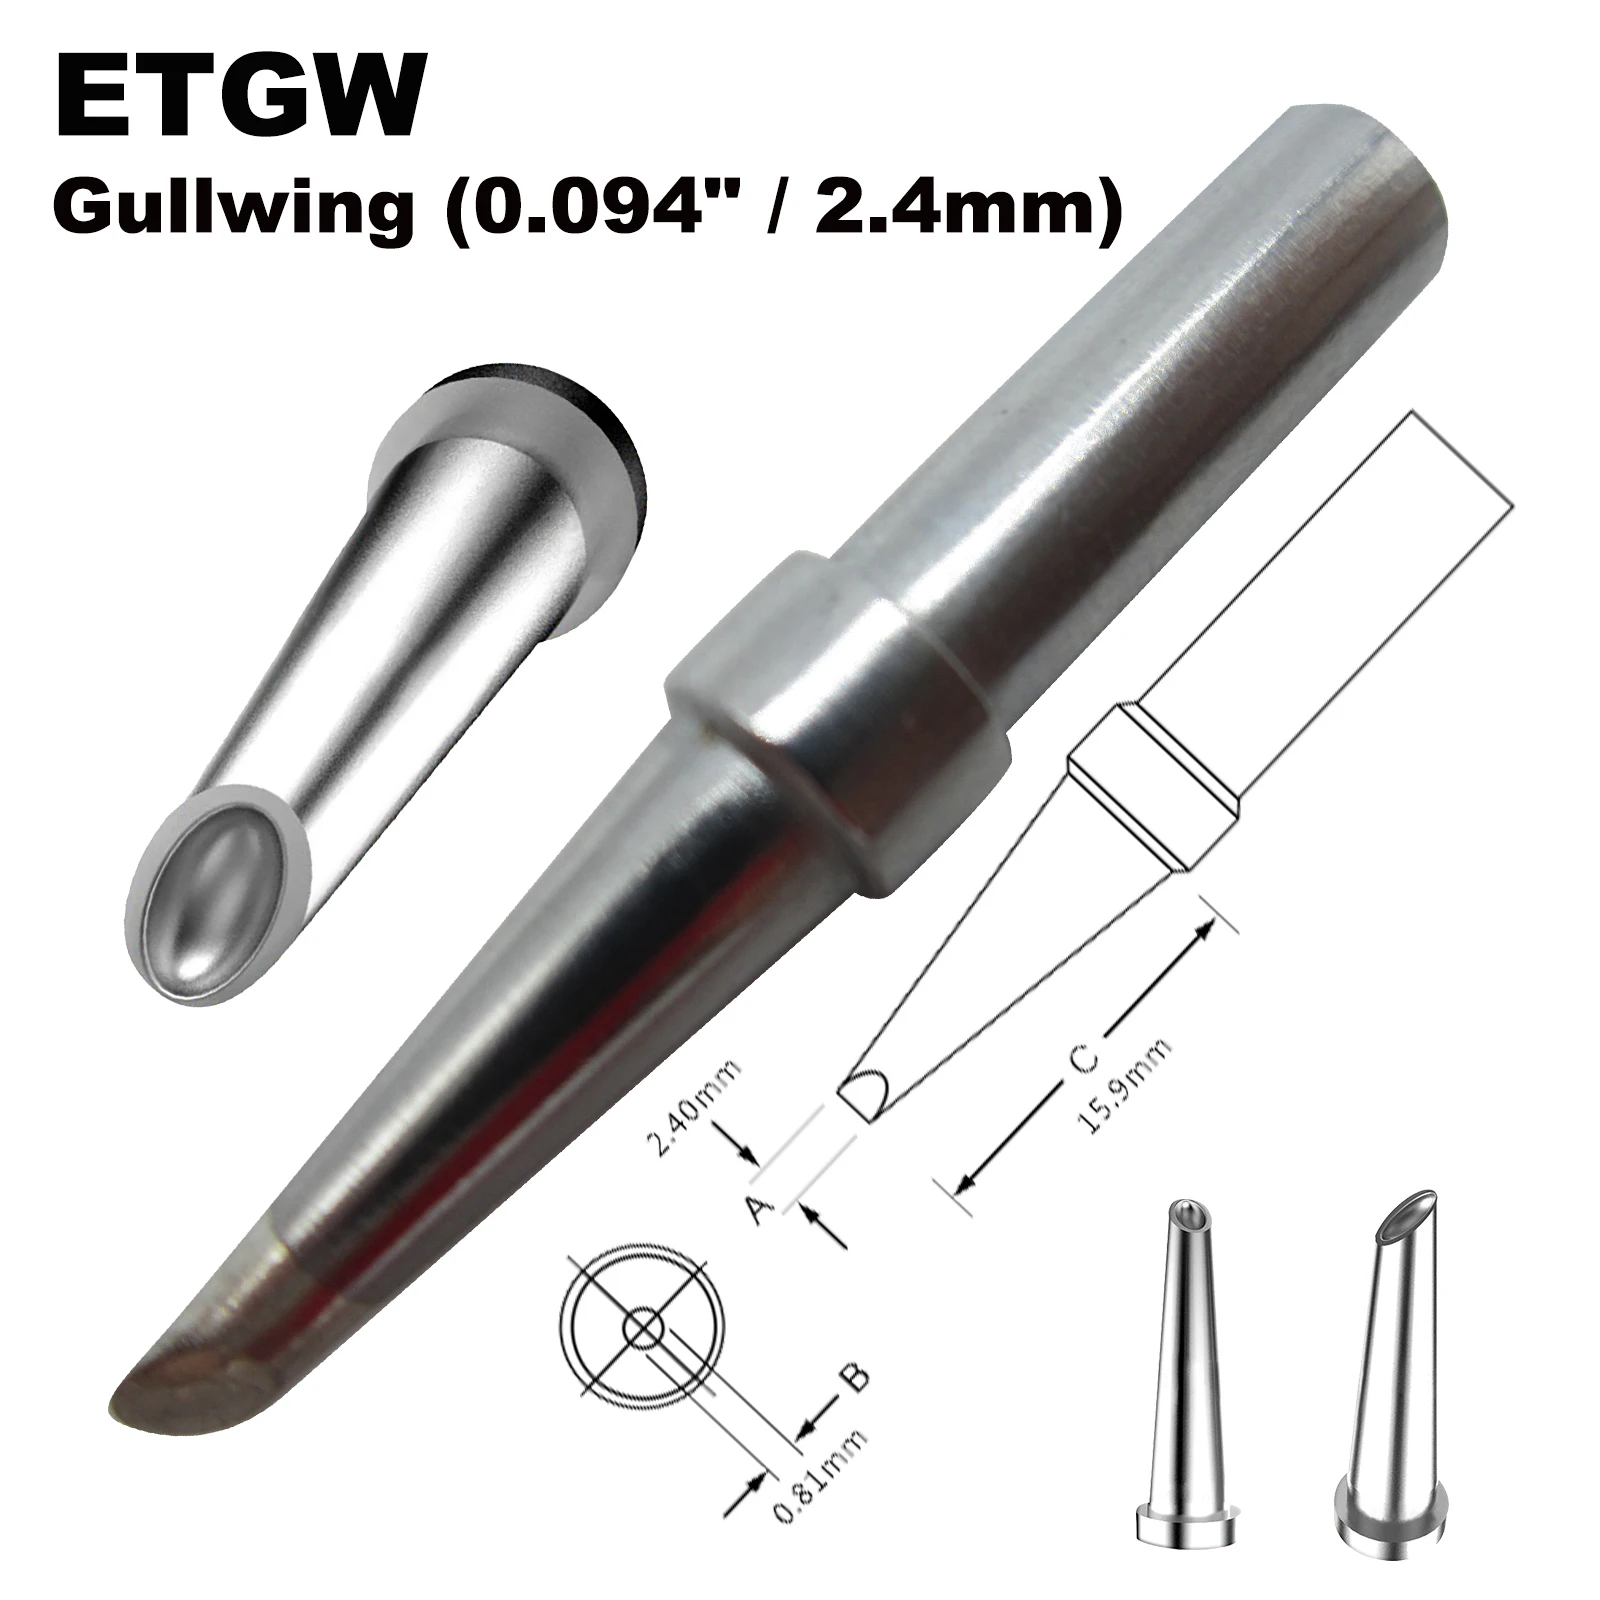 

ETGW Soldering Tip Gull Wing 2.4mm Fit WELLER WES51 WES50 WESD51 WE1010NA WE1010EU PES51 PES50 LR21 LR20 Pencil Iron Bit